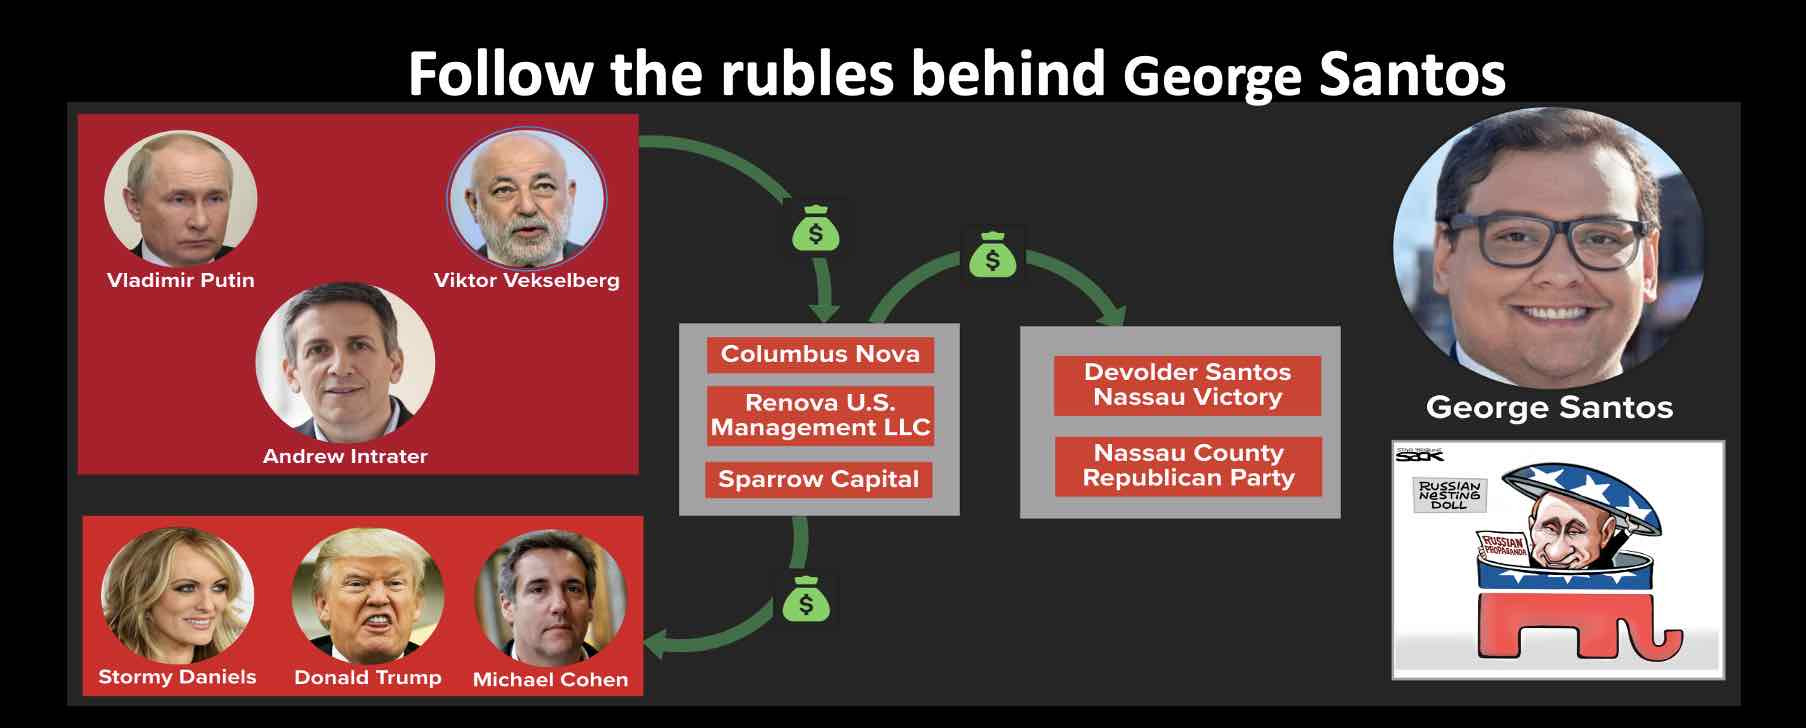 Follow the rubles behind George Santos campaign